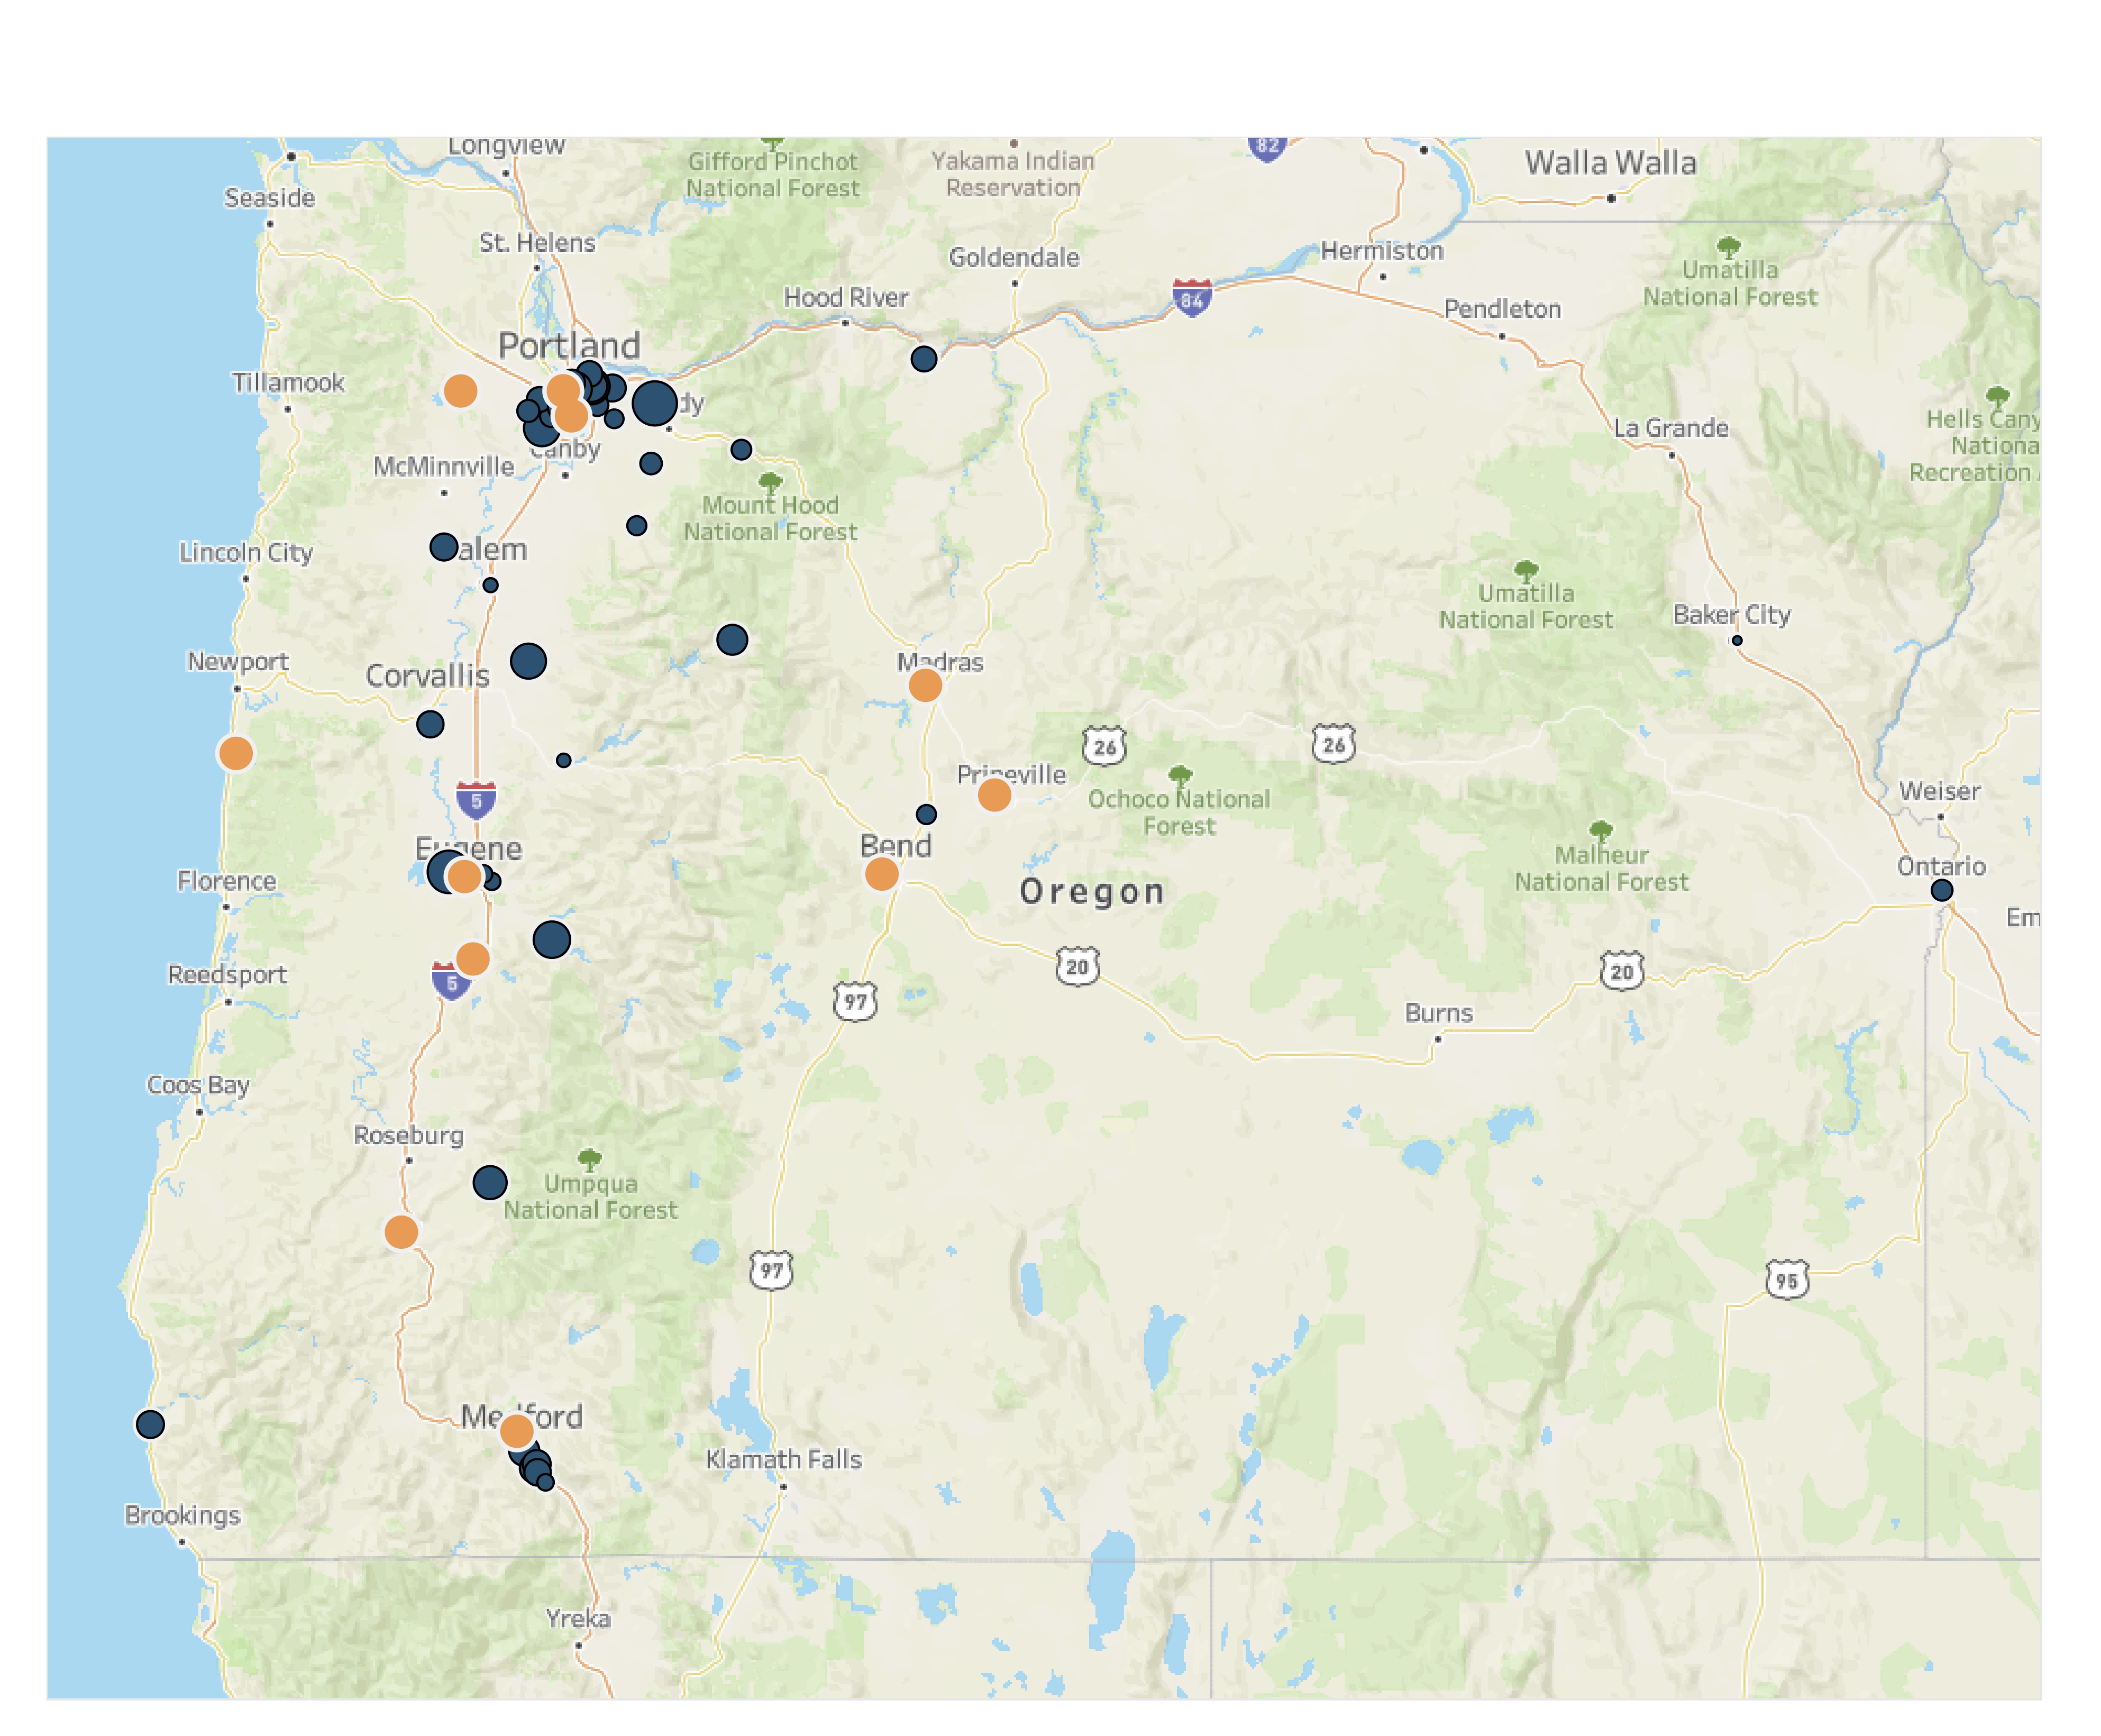 This is a map showing all the places in Oregon OHCS has invested in affordable housing development with blue dots showing rental housing and orange dots showing homeownership. There are many more blue dots than orange dots because the agency has invested more in affordable rental housing development. The dots correlate with population, so both colors of dots dots show more developments in the Portland region and the I-5 corridor.